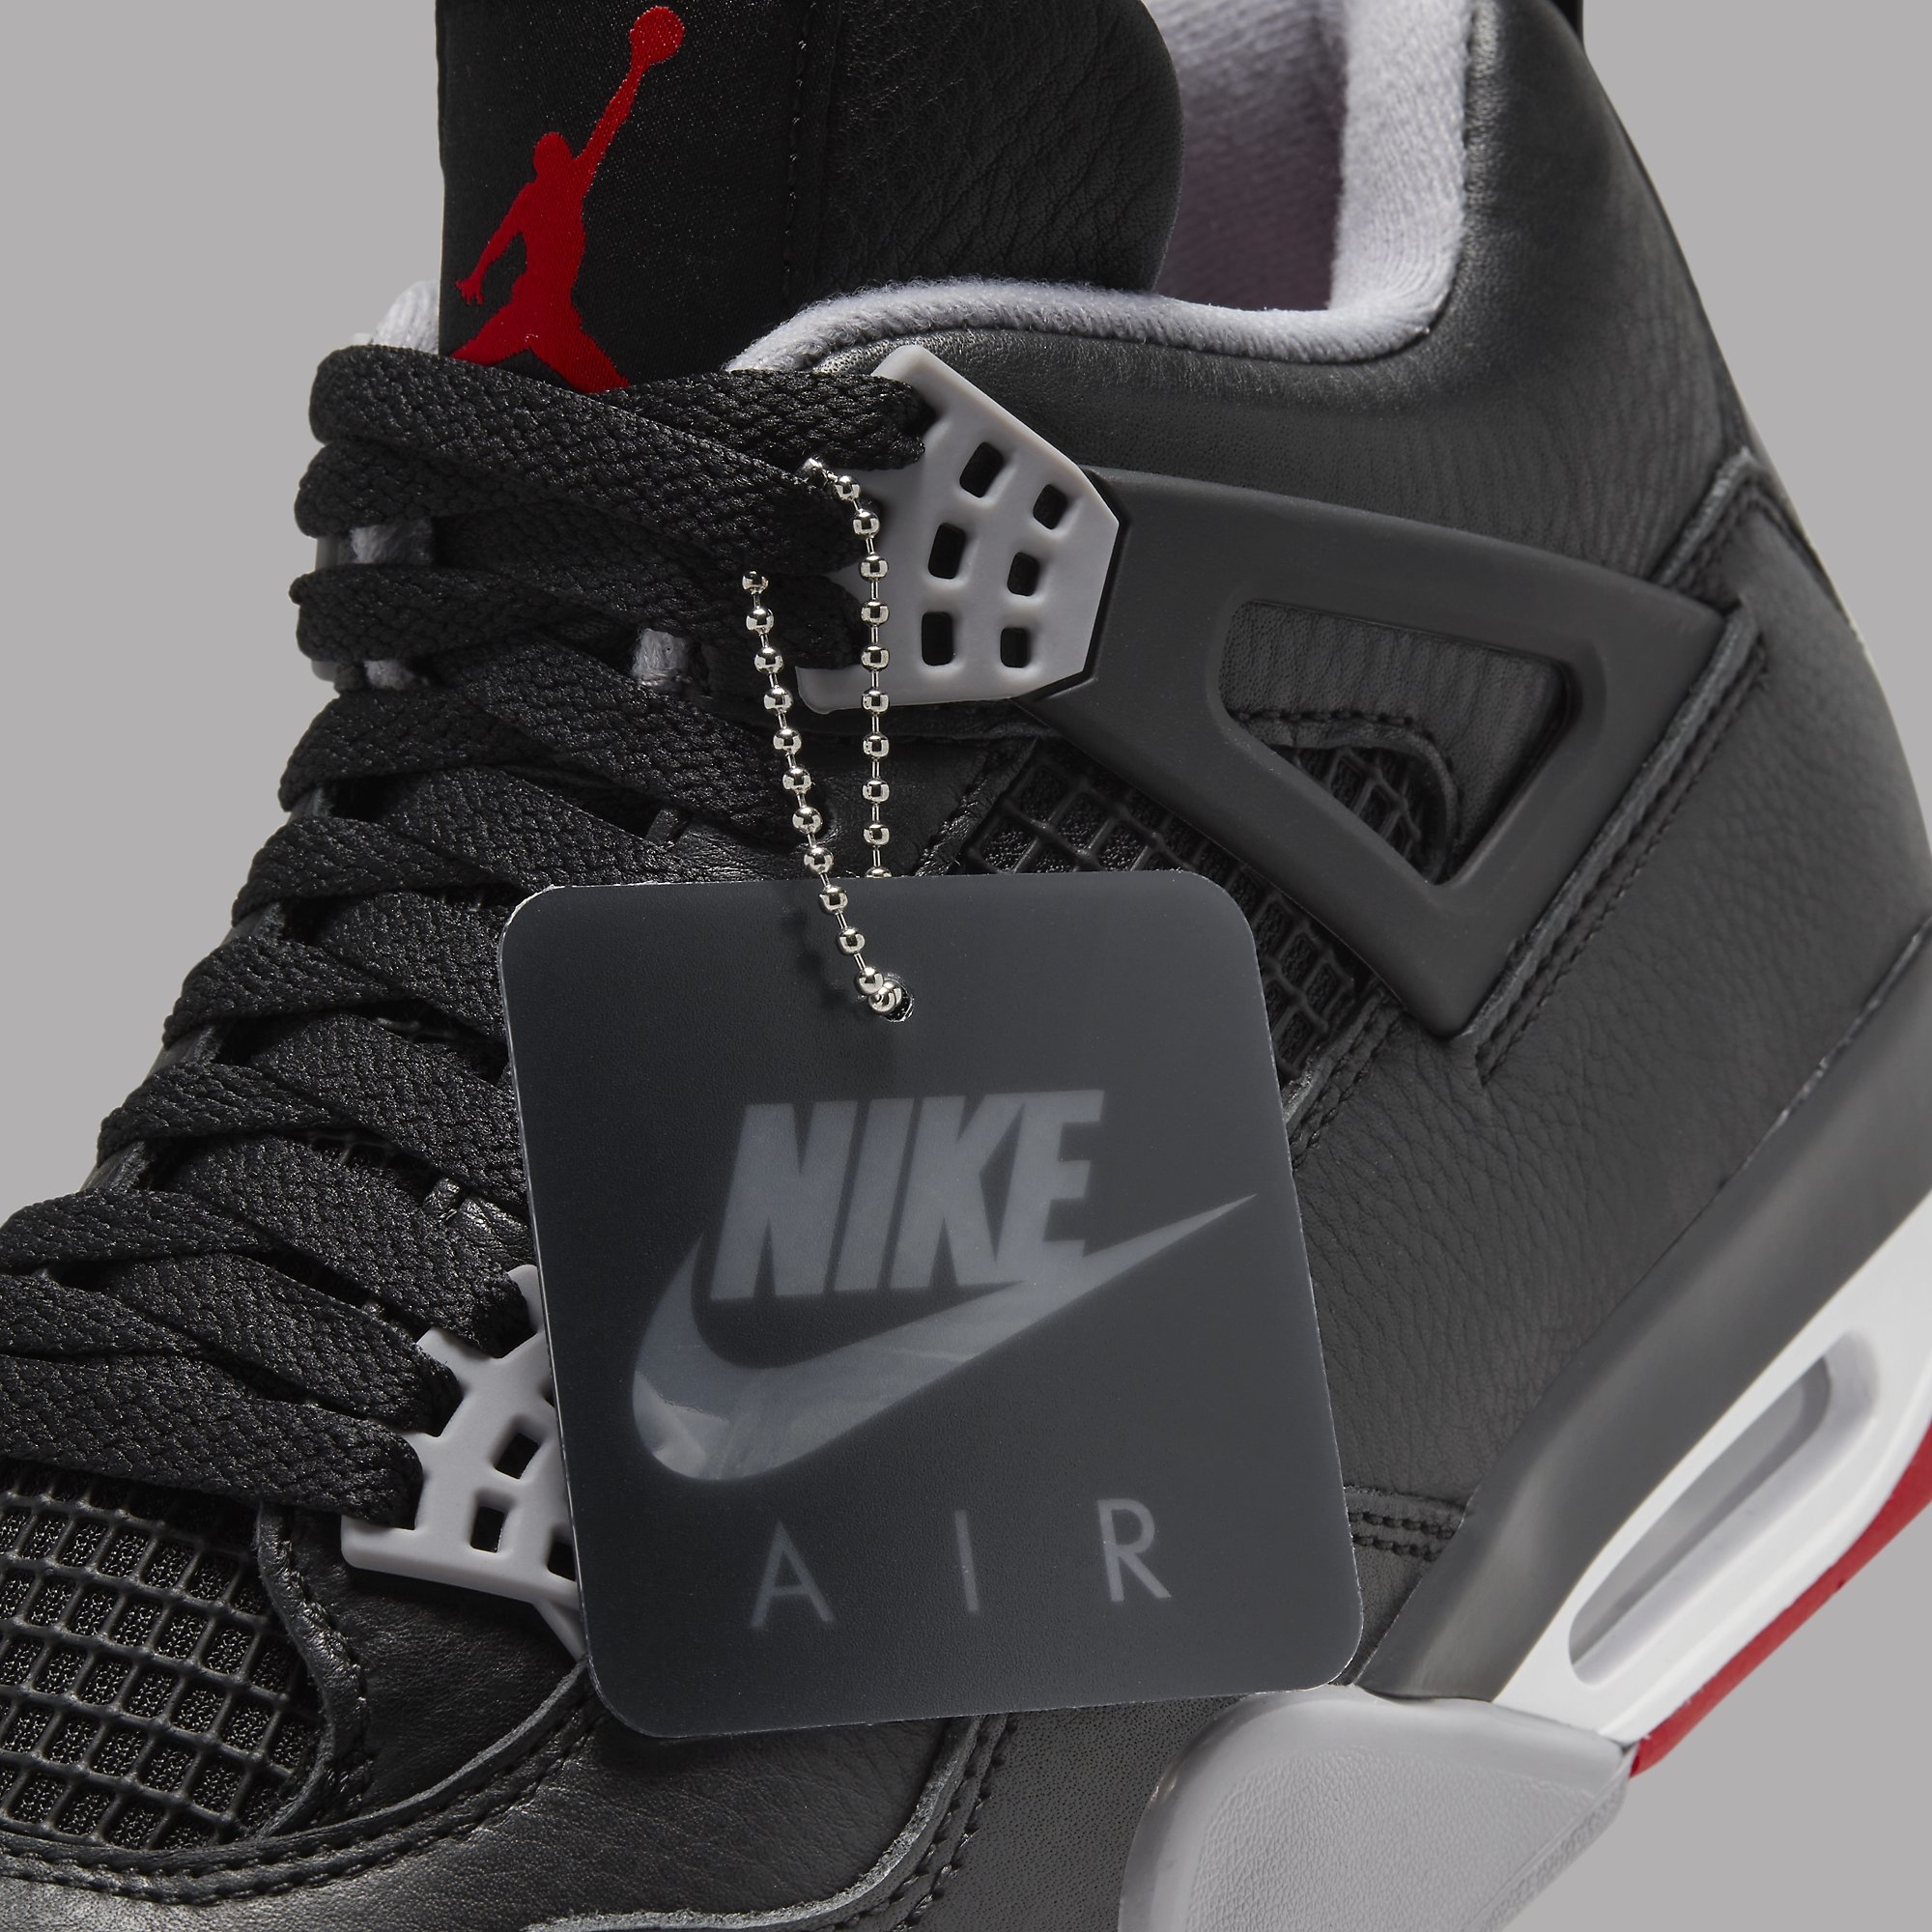 Air Jordan 4 'Bred Reimagined' FV5029-006 Release Date: How to Buy